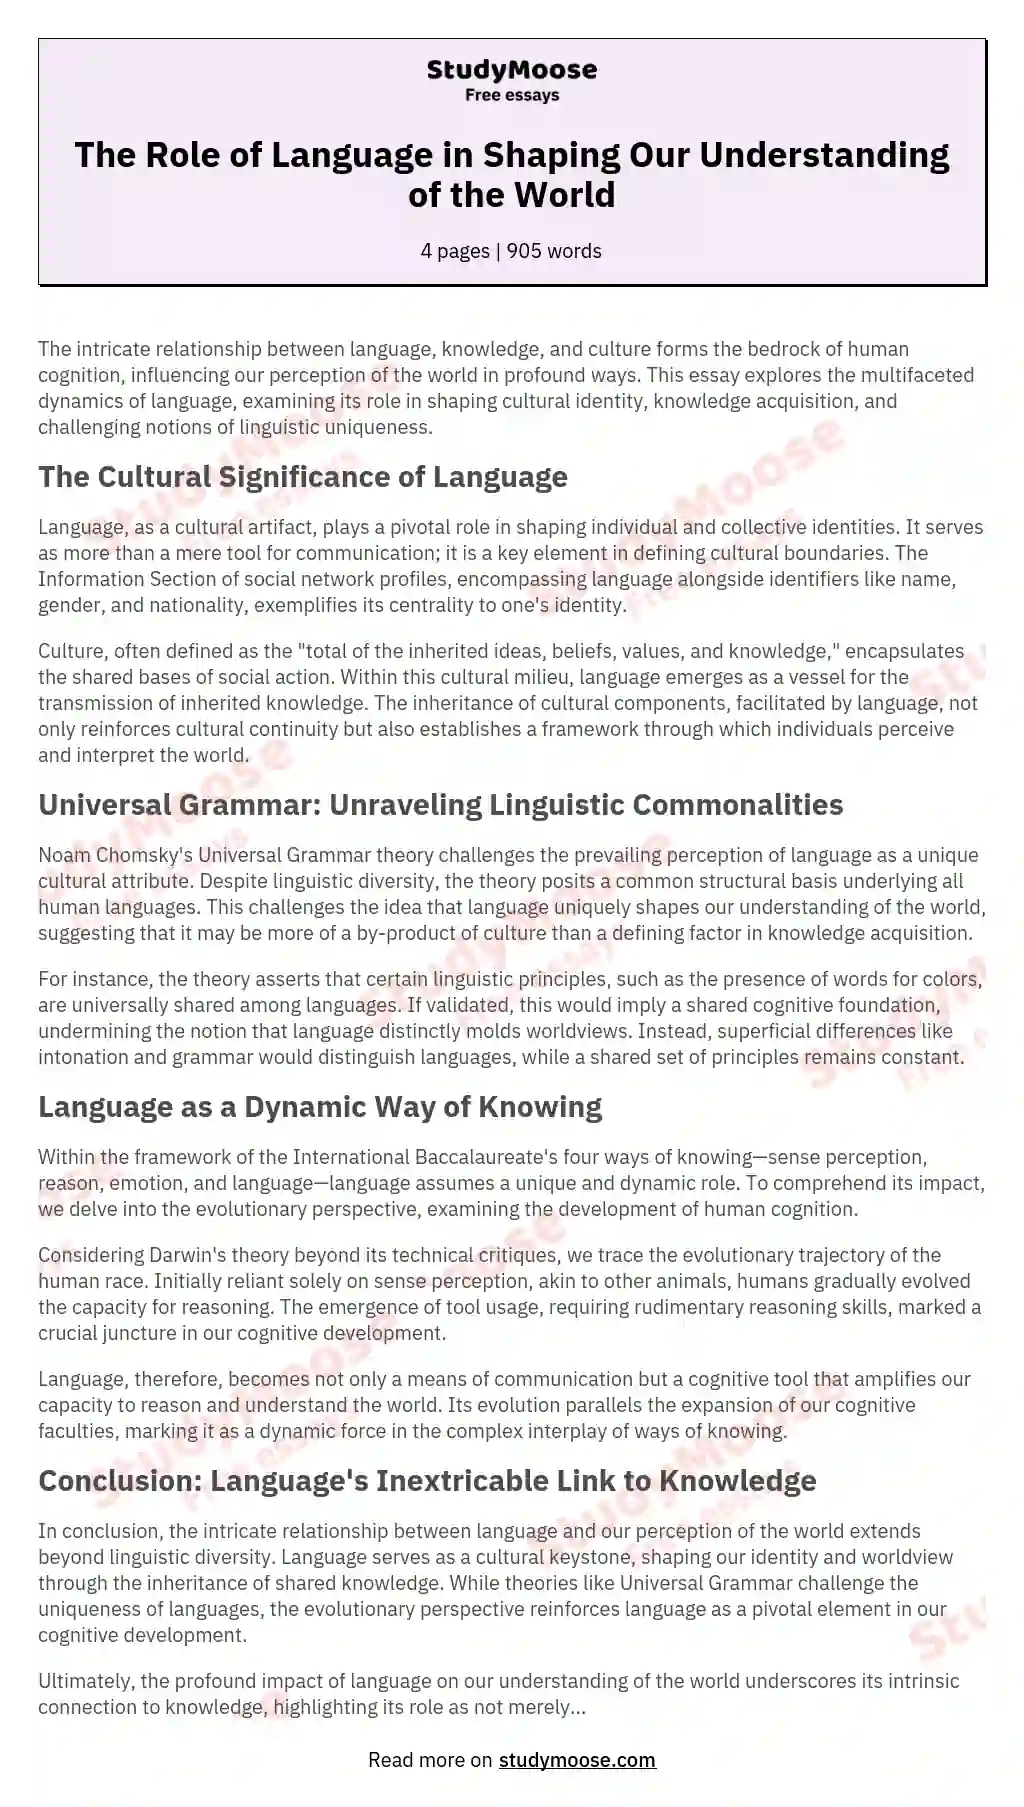 The Role of Language in Shaping Our Understanding of the World essay